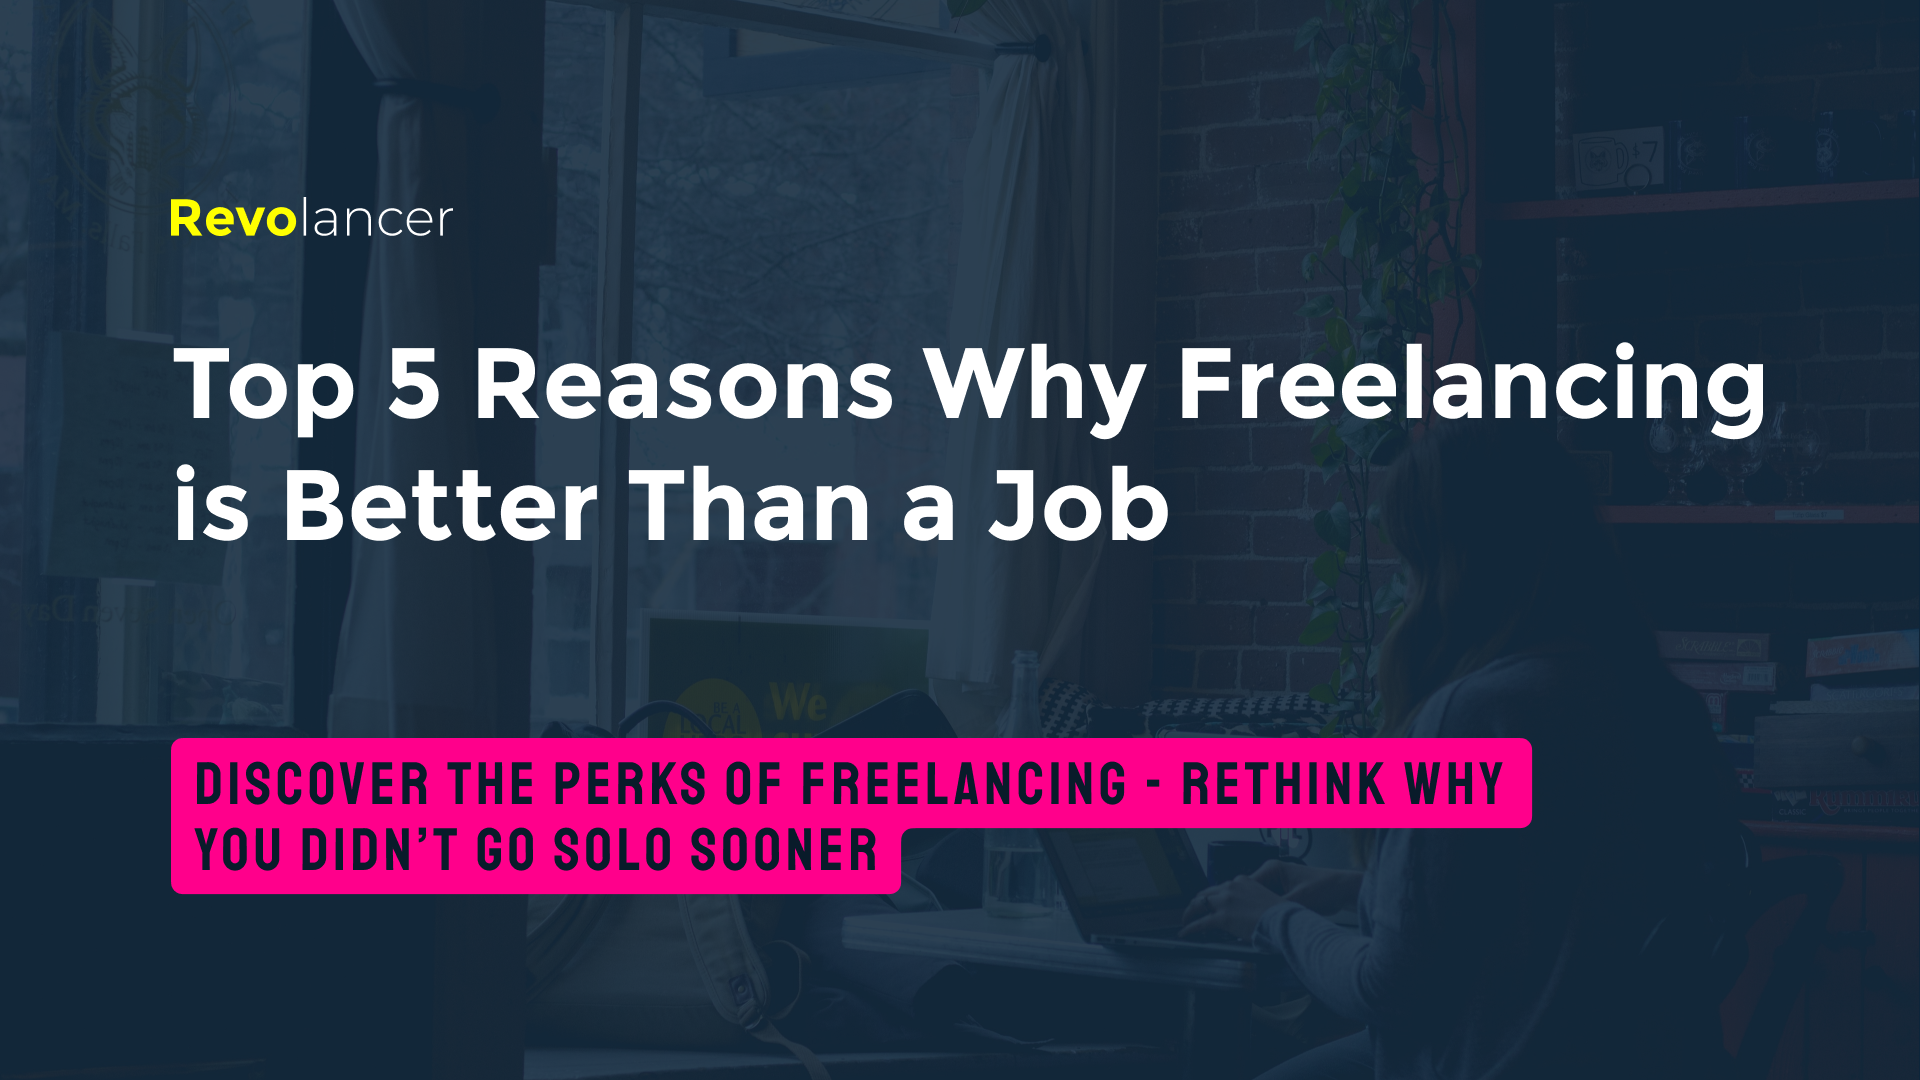 Why Freelancing Is Better Than A Job – Top 5 Reasons